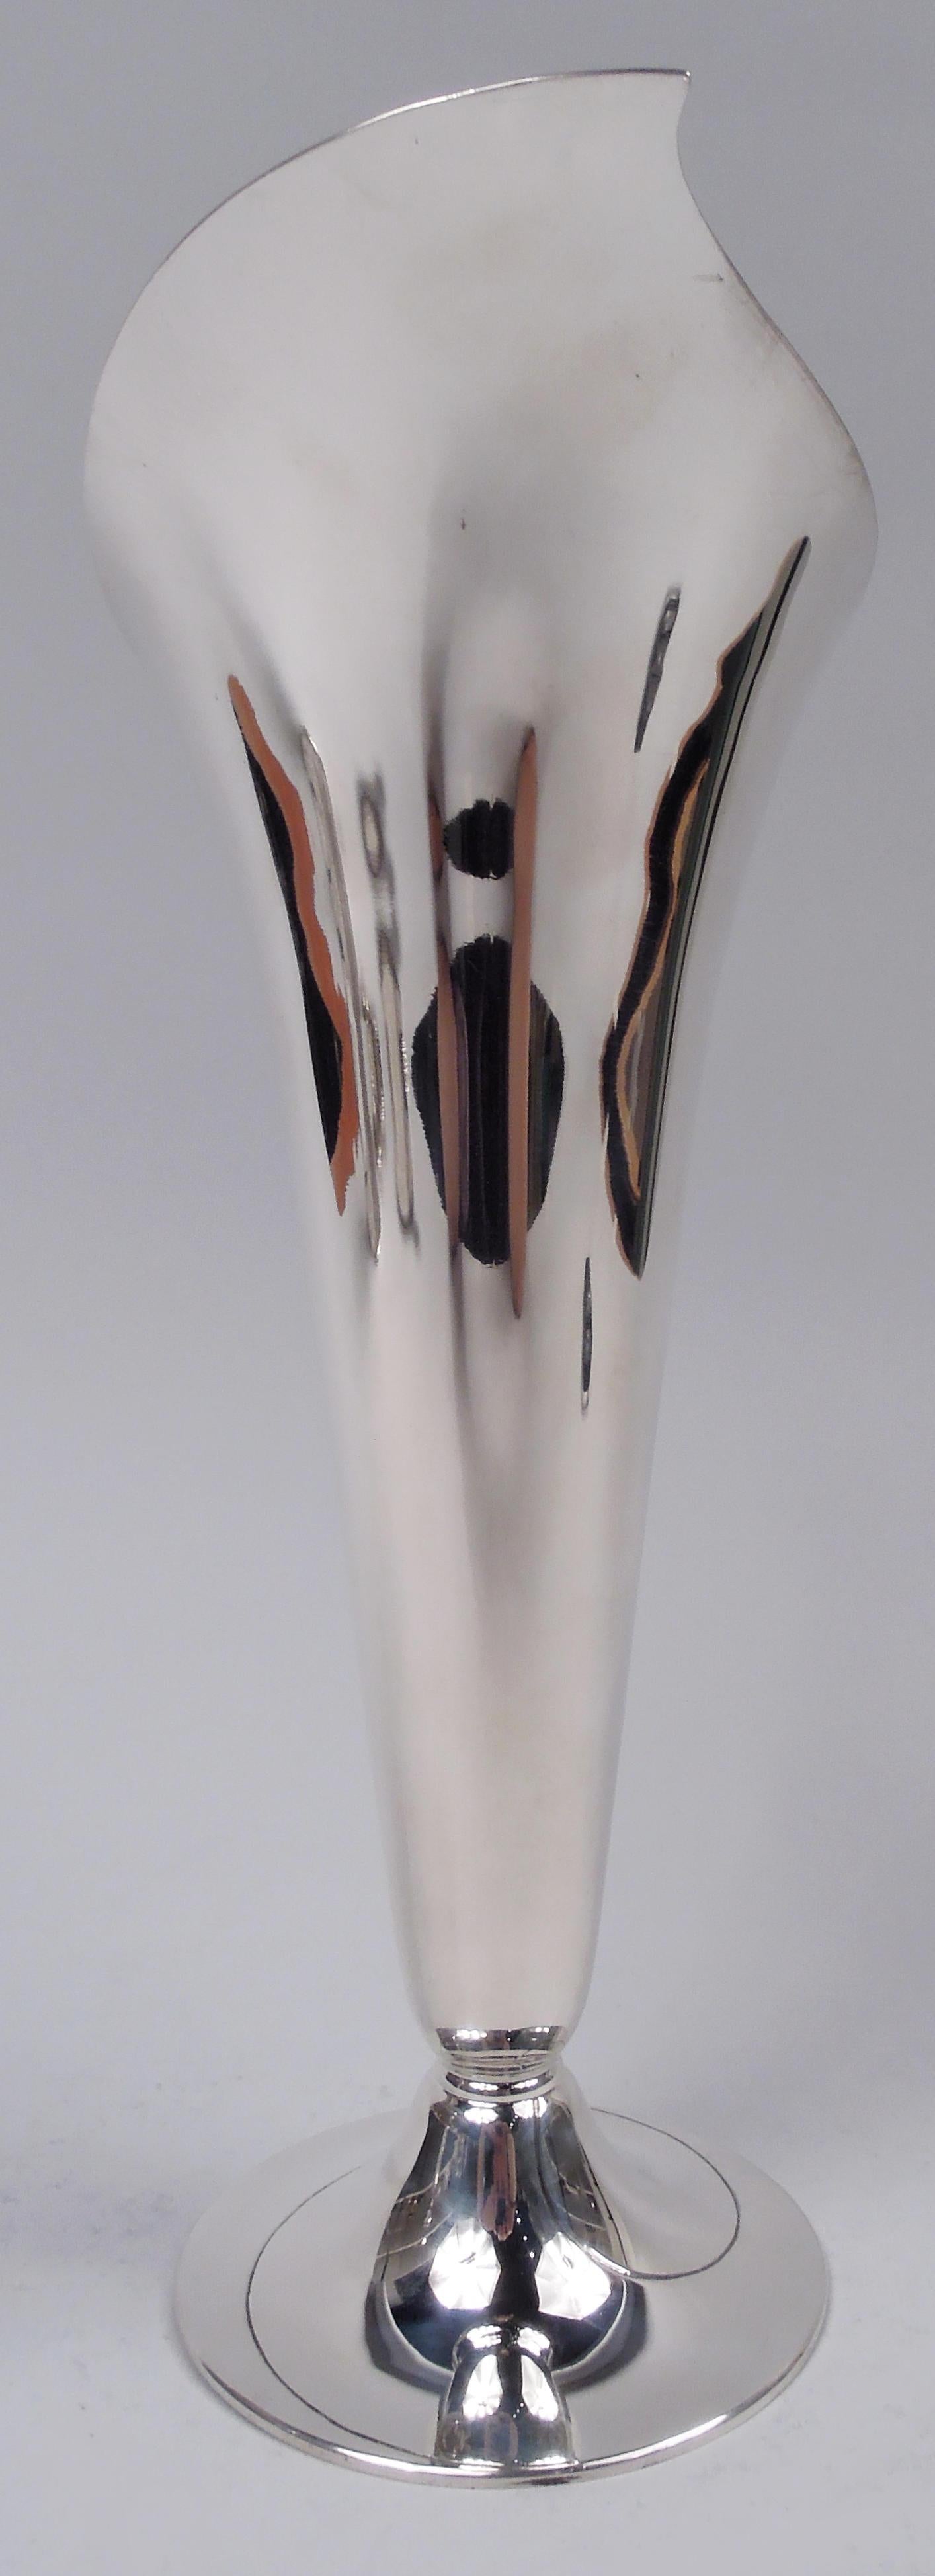 American Classic Tiffany Midcentury Modern Abstract Calla Lily Vase For Sale